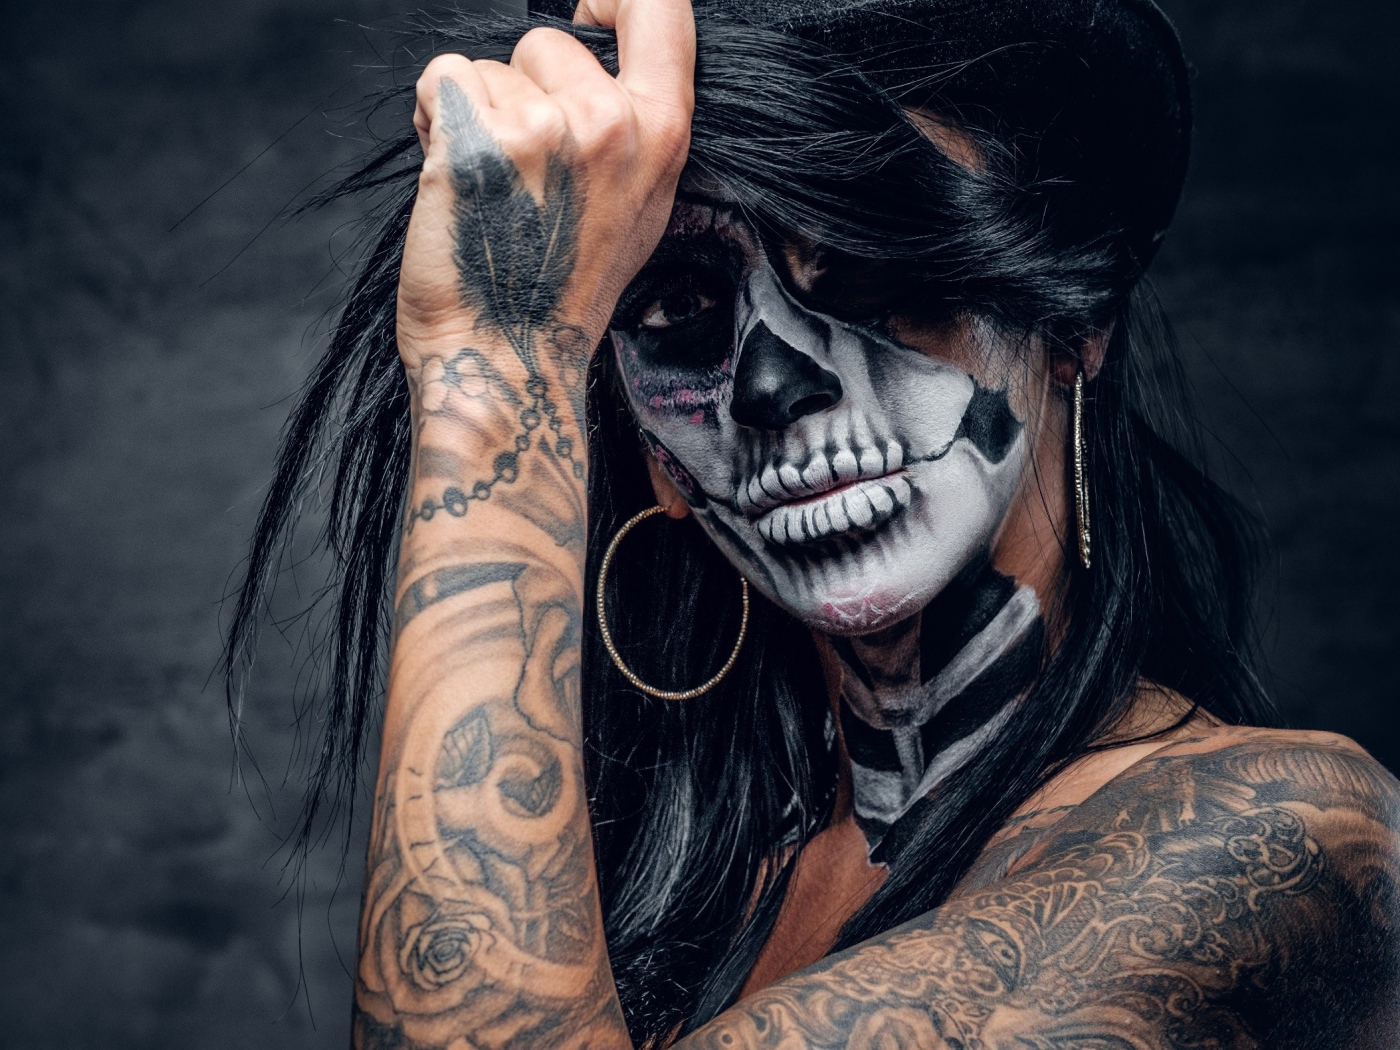 Brunette with tattoos and makeup on her face